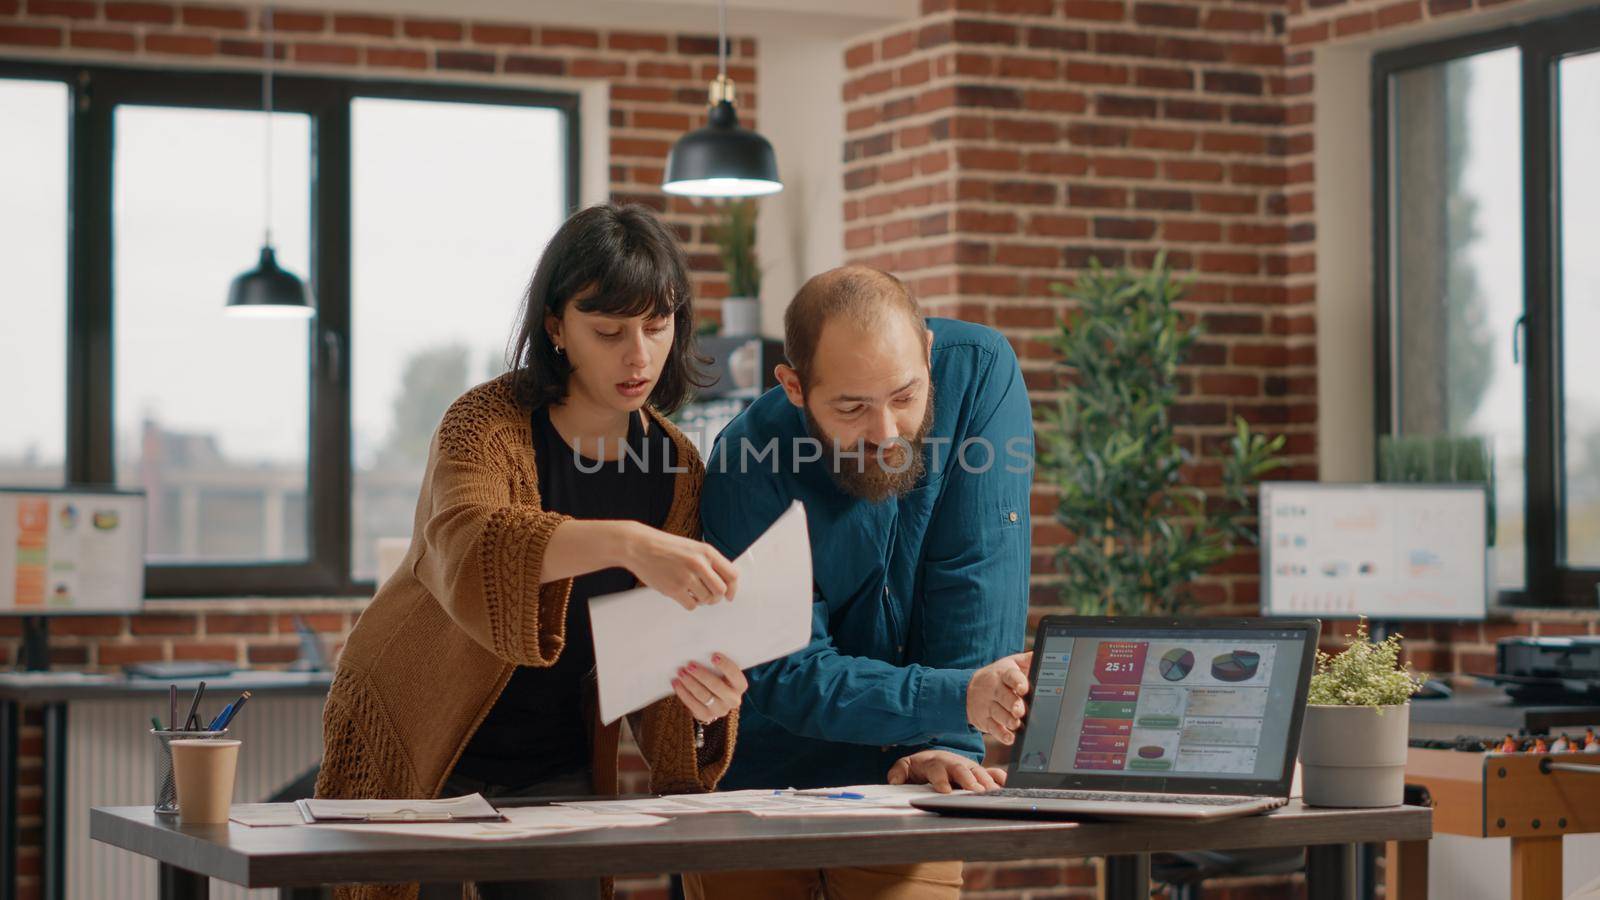 Man and woman doing teamwork to plan business project by DCStudio